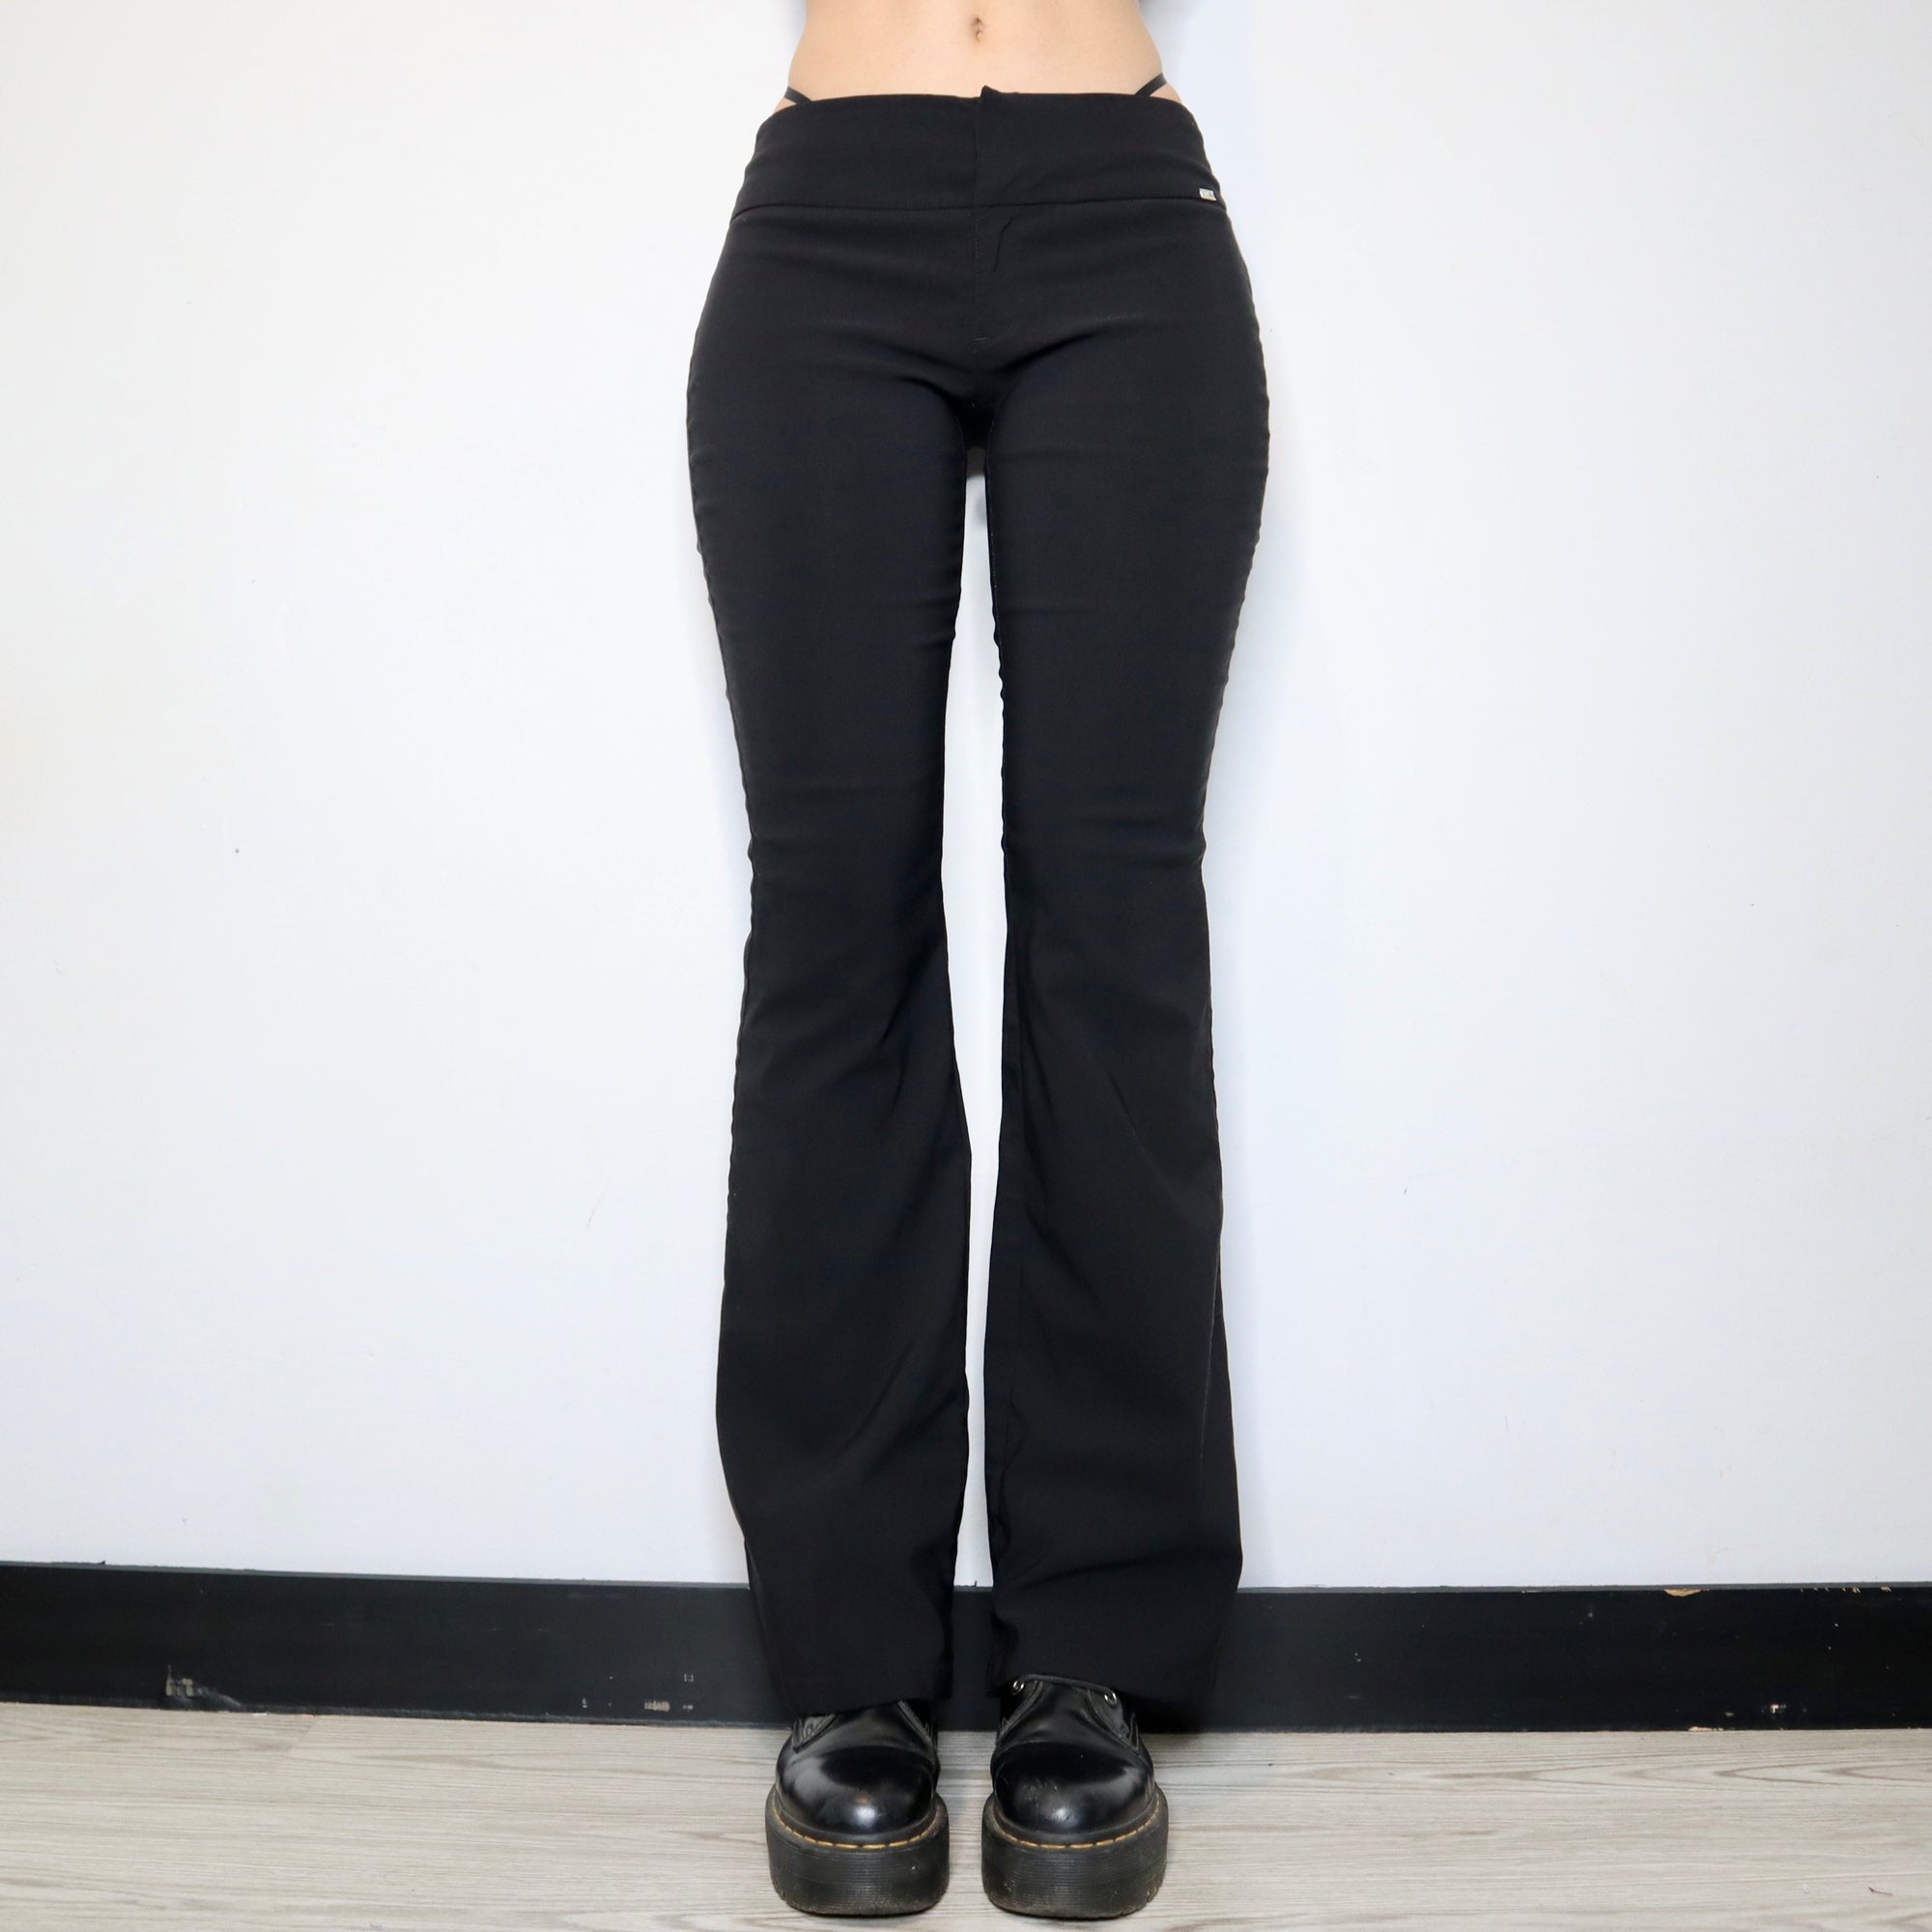 Vintage Early 2000s Guess Black Flare Pants